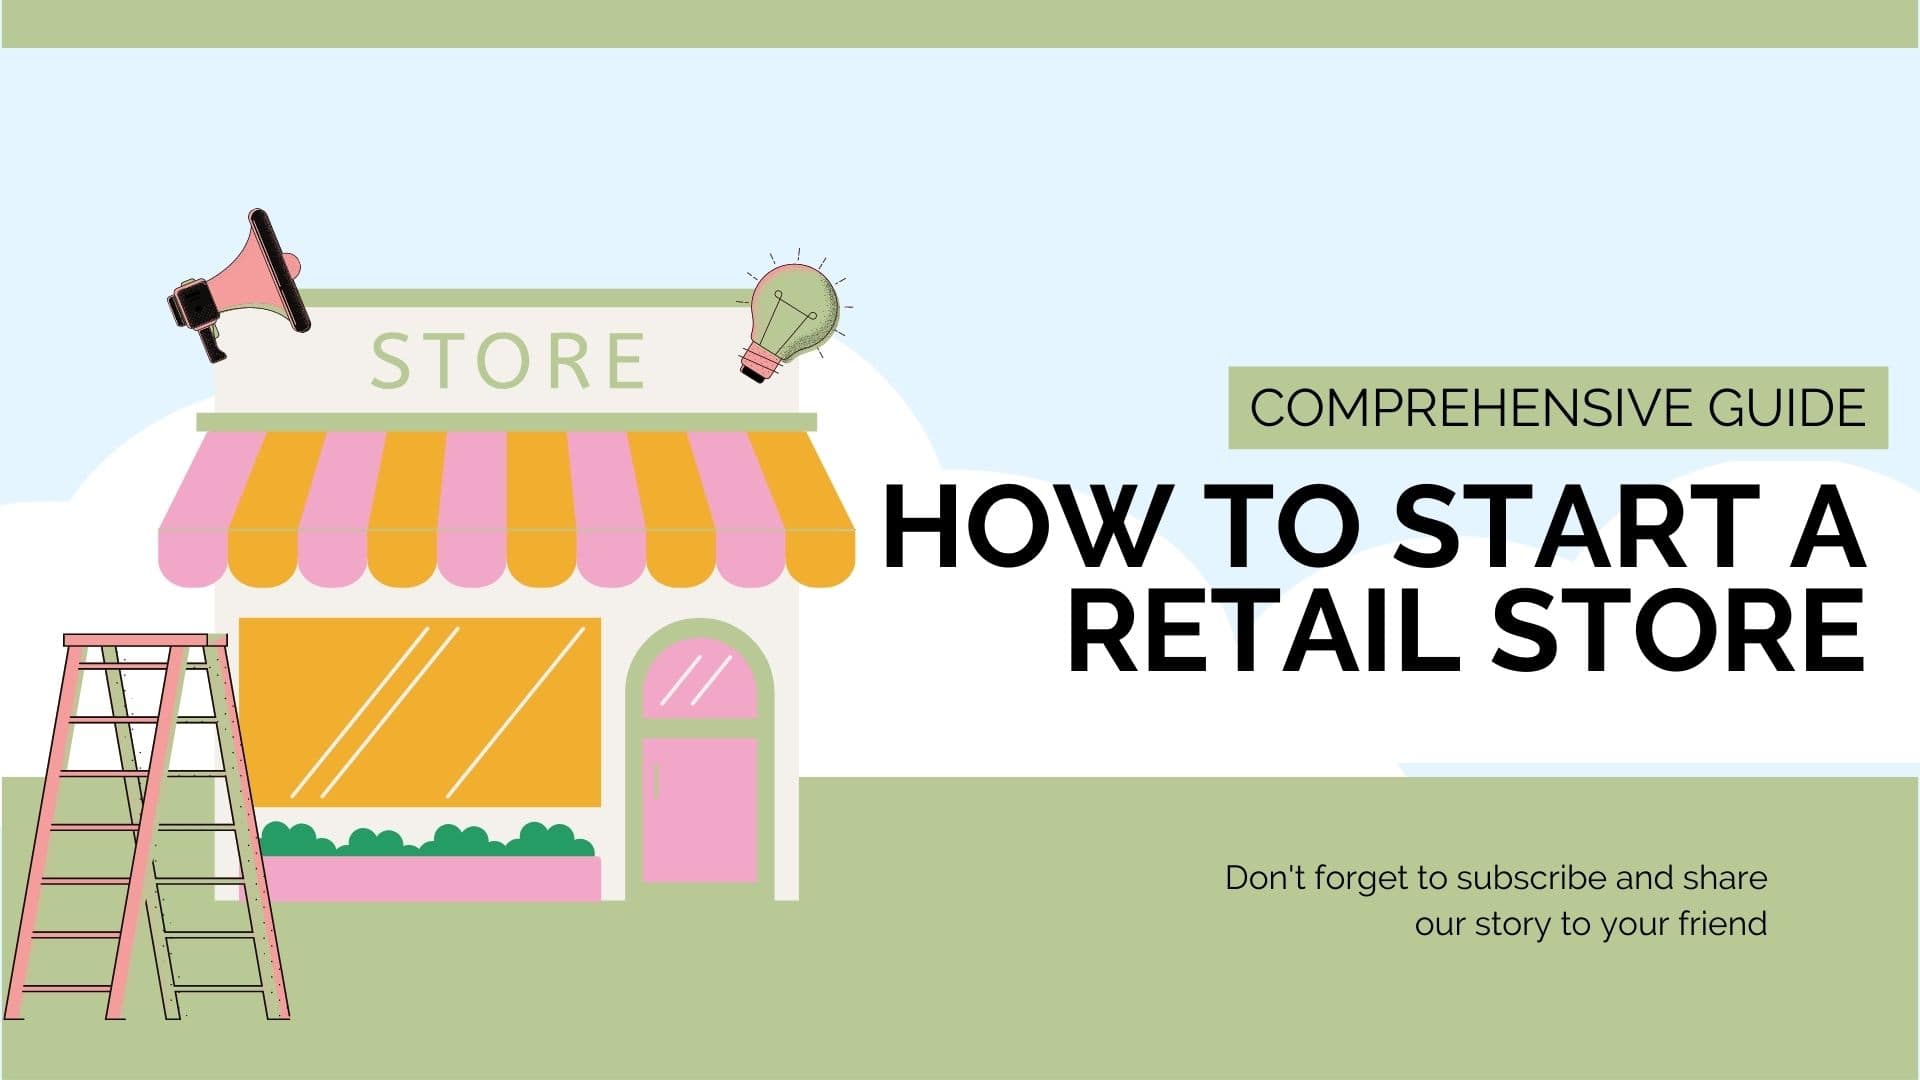 How to start a retail store - complete guide